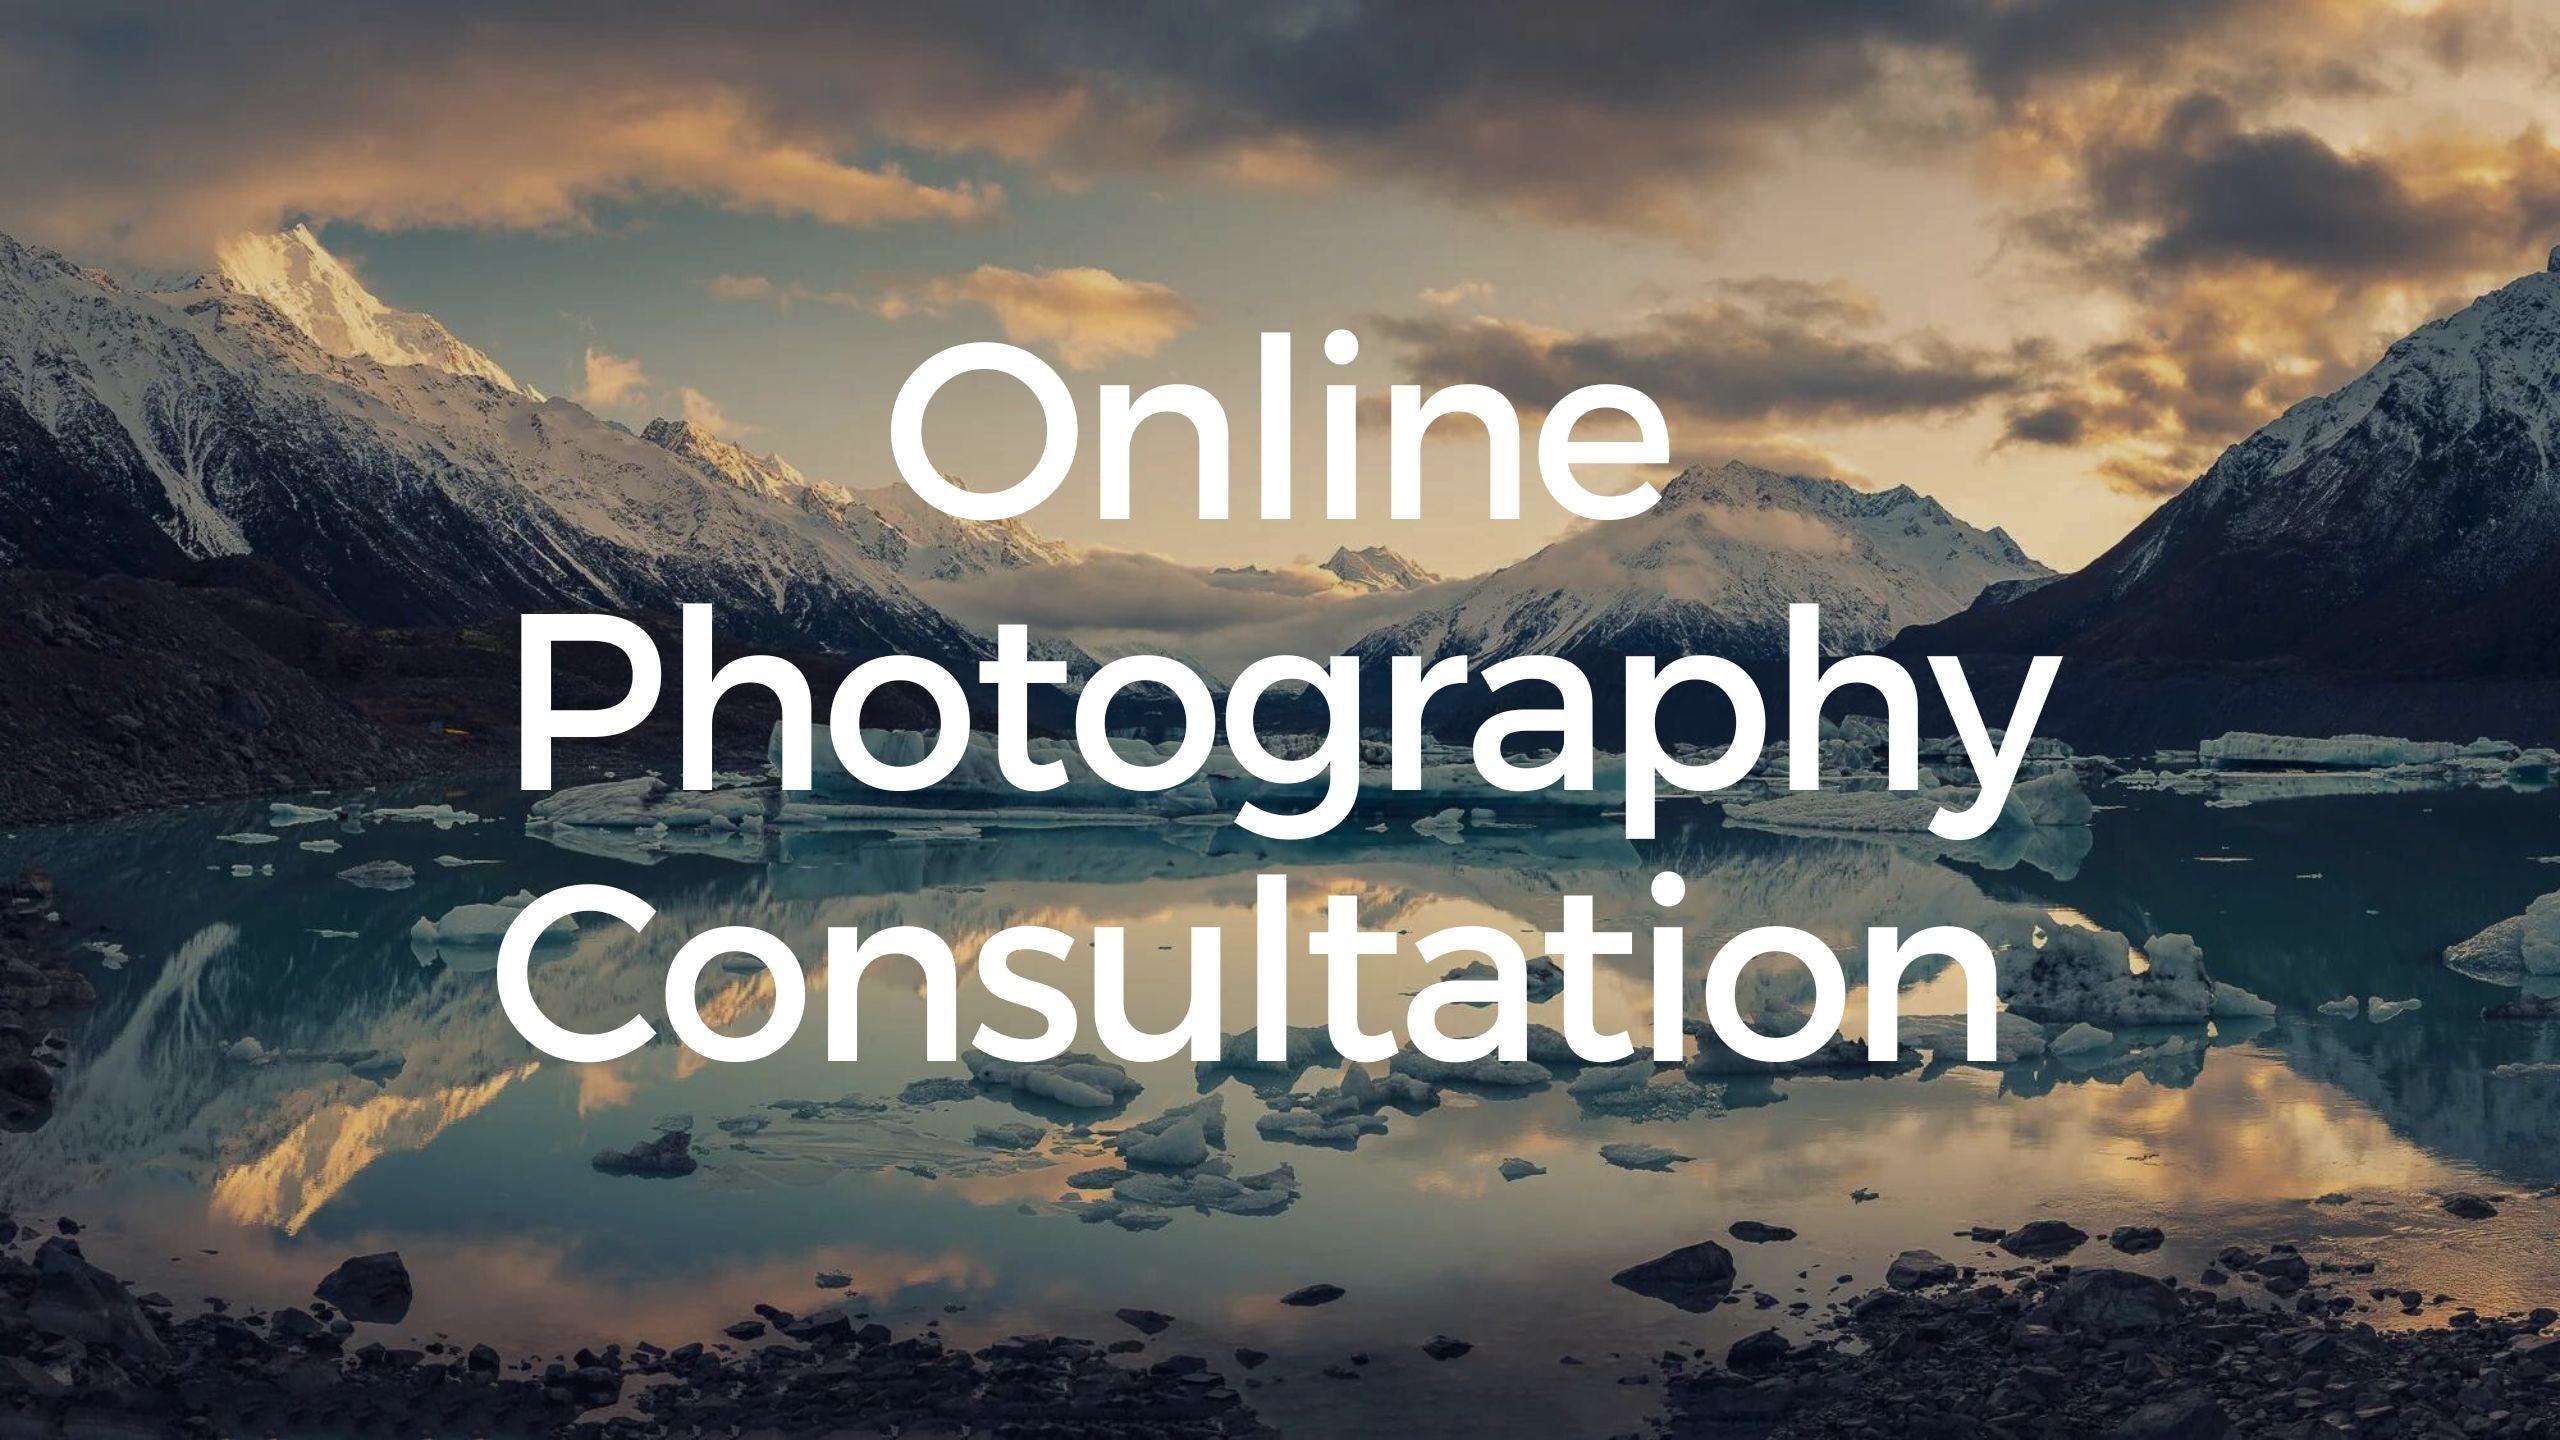 Unlock Your Photographic Potential with Stephen Milner's Online Photography Consultation and Mentoring Services - Stephen Milner